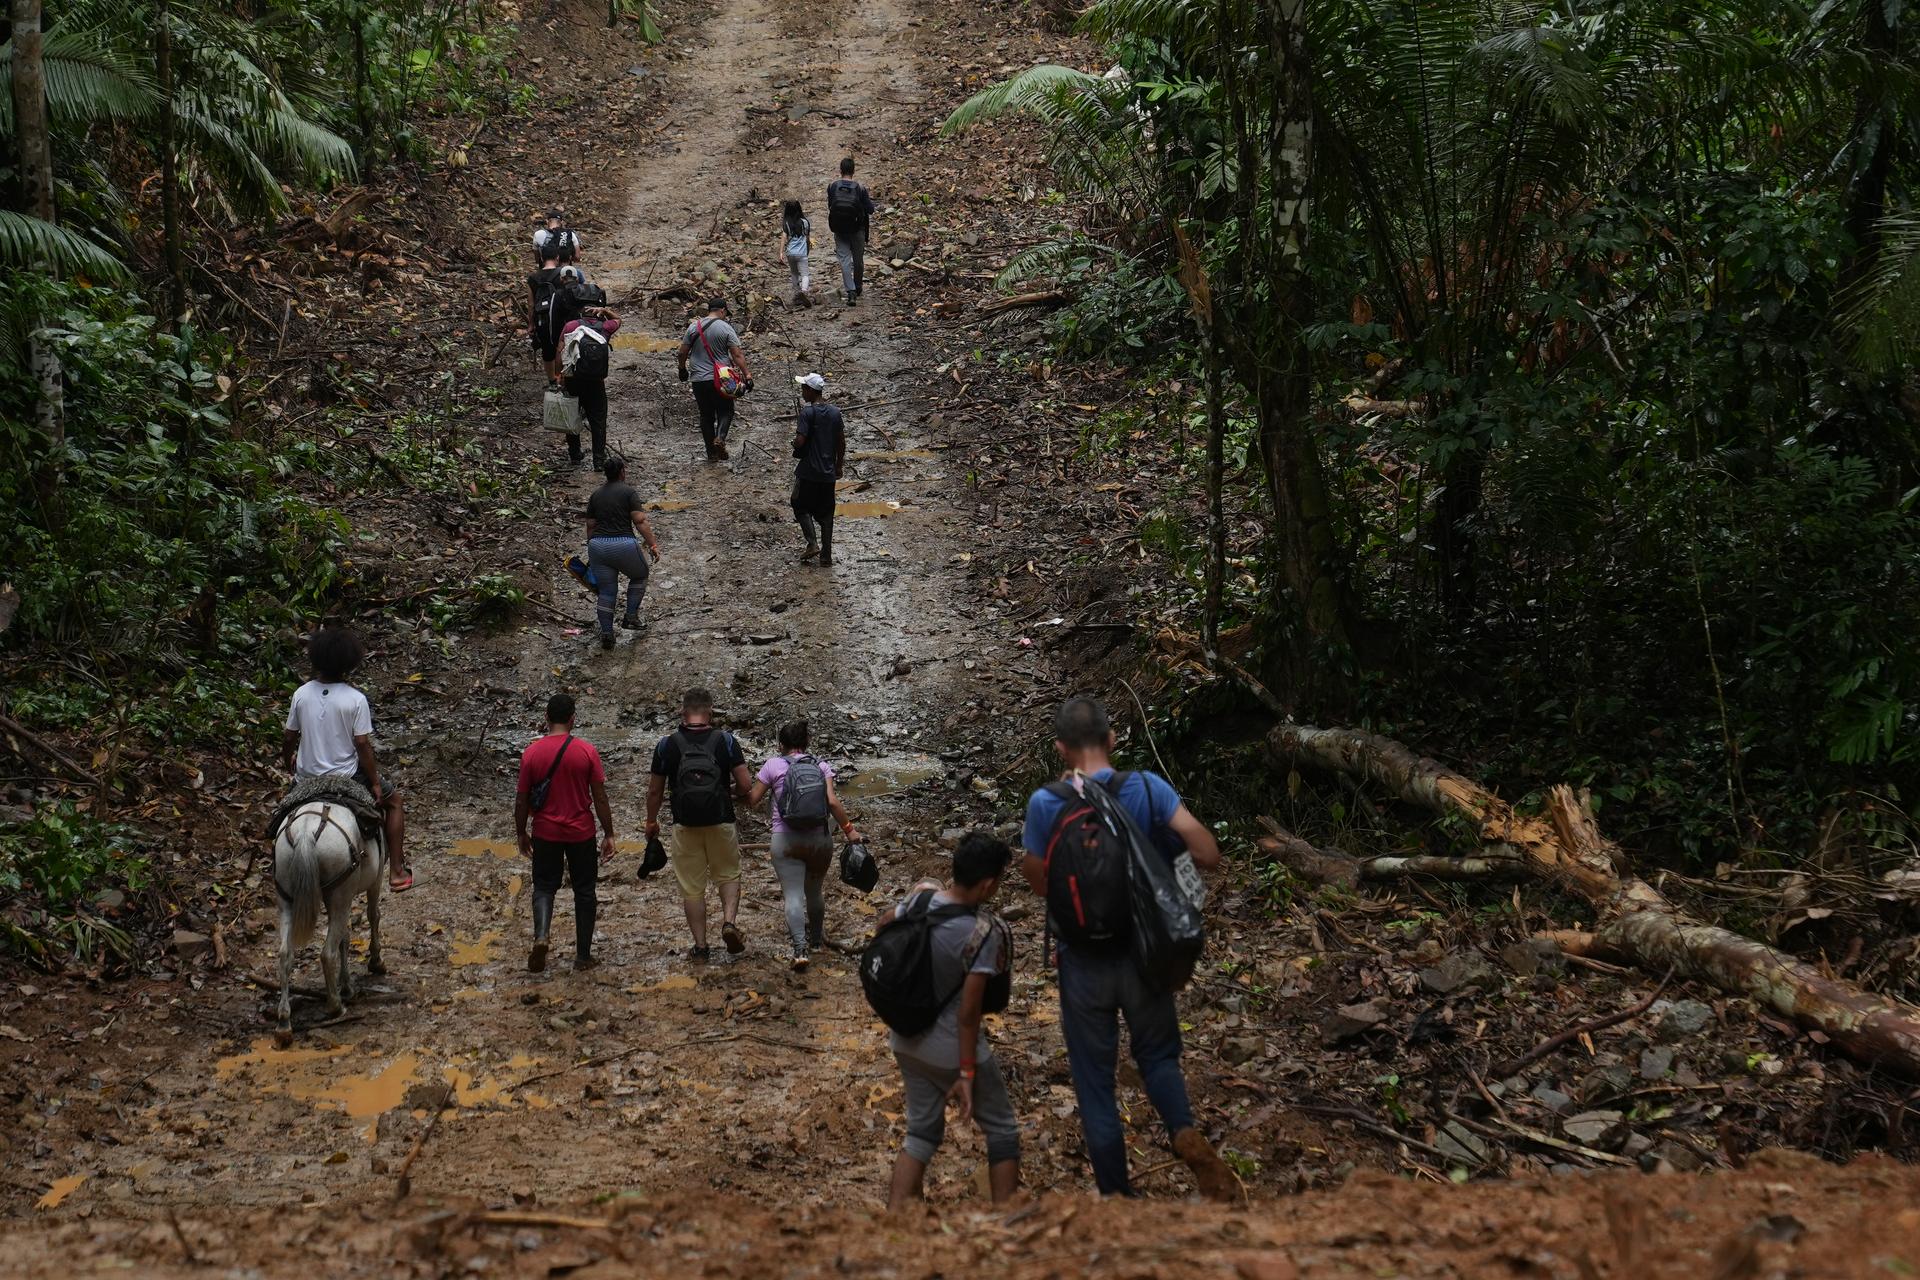 According to Panamanian authorities, more than 3,000 refugees from Afghanistan have crossed the Darien Gap since the Taliban regime took over in 2021. These refugees have been unable to get visas that will enable them to fly to the US.